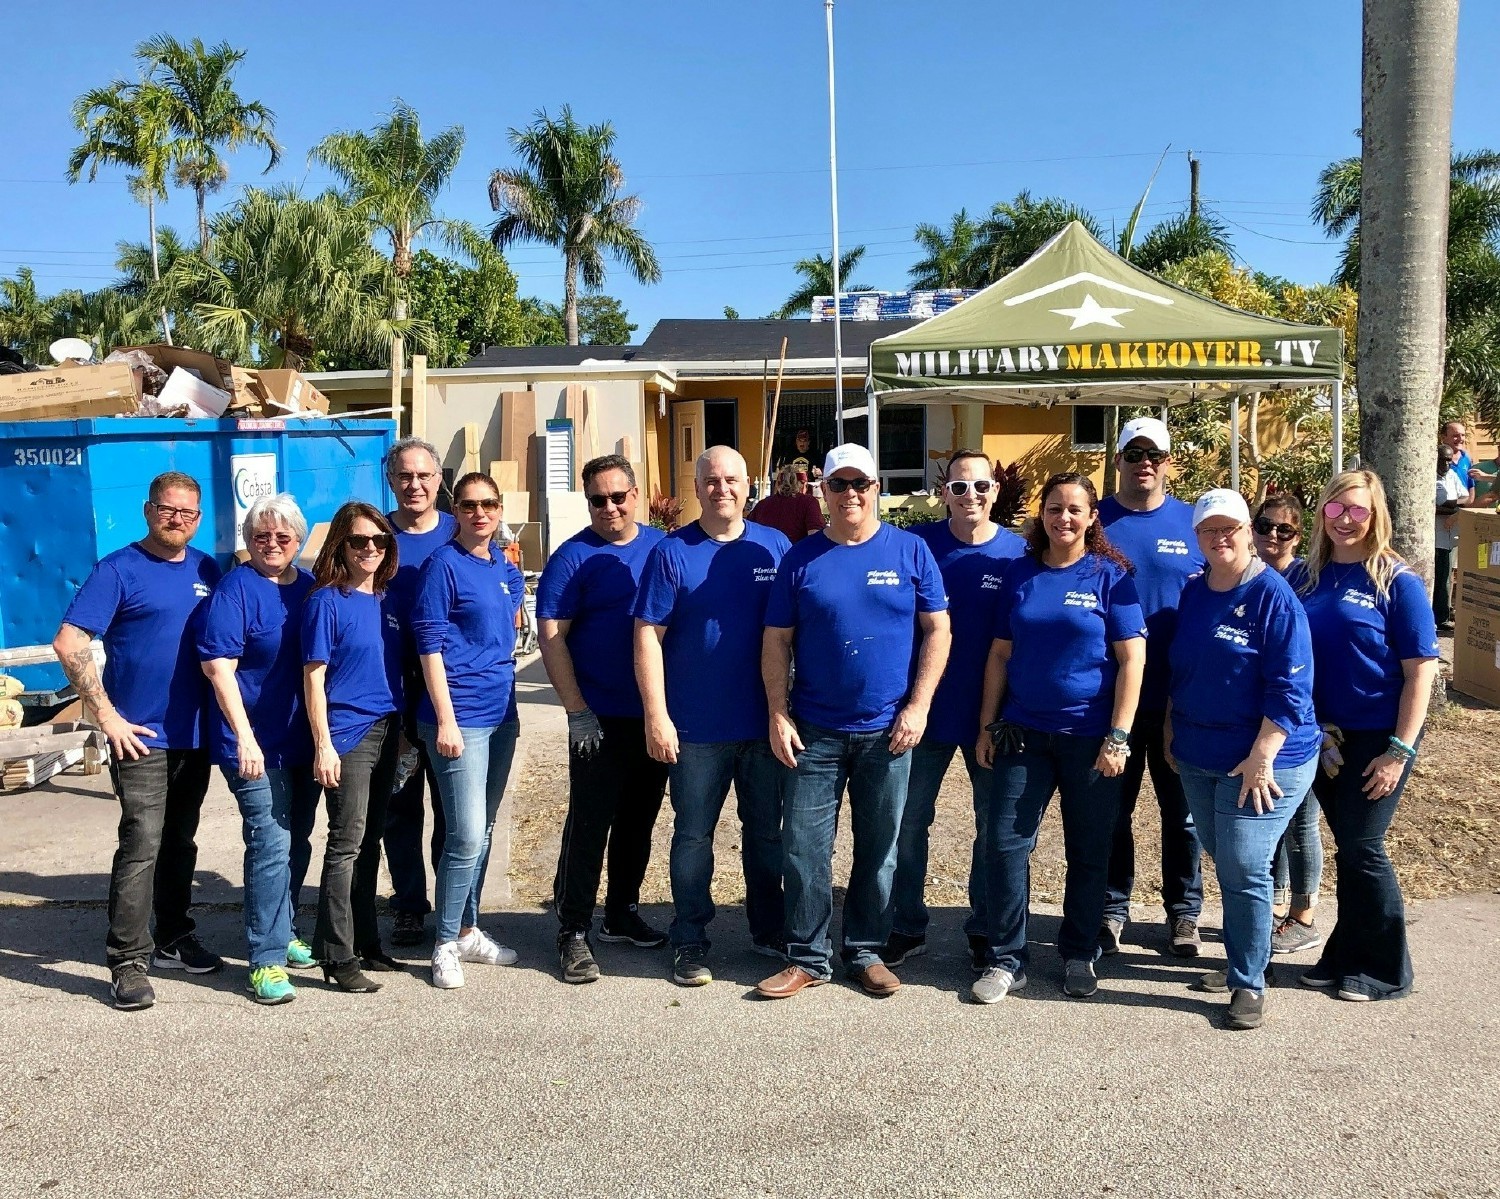 Florida Blue and Military Makeover partner to renovate the home of a veteran killed during the Parkland school shooting